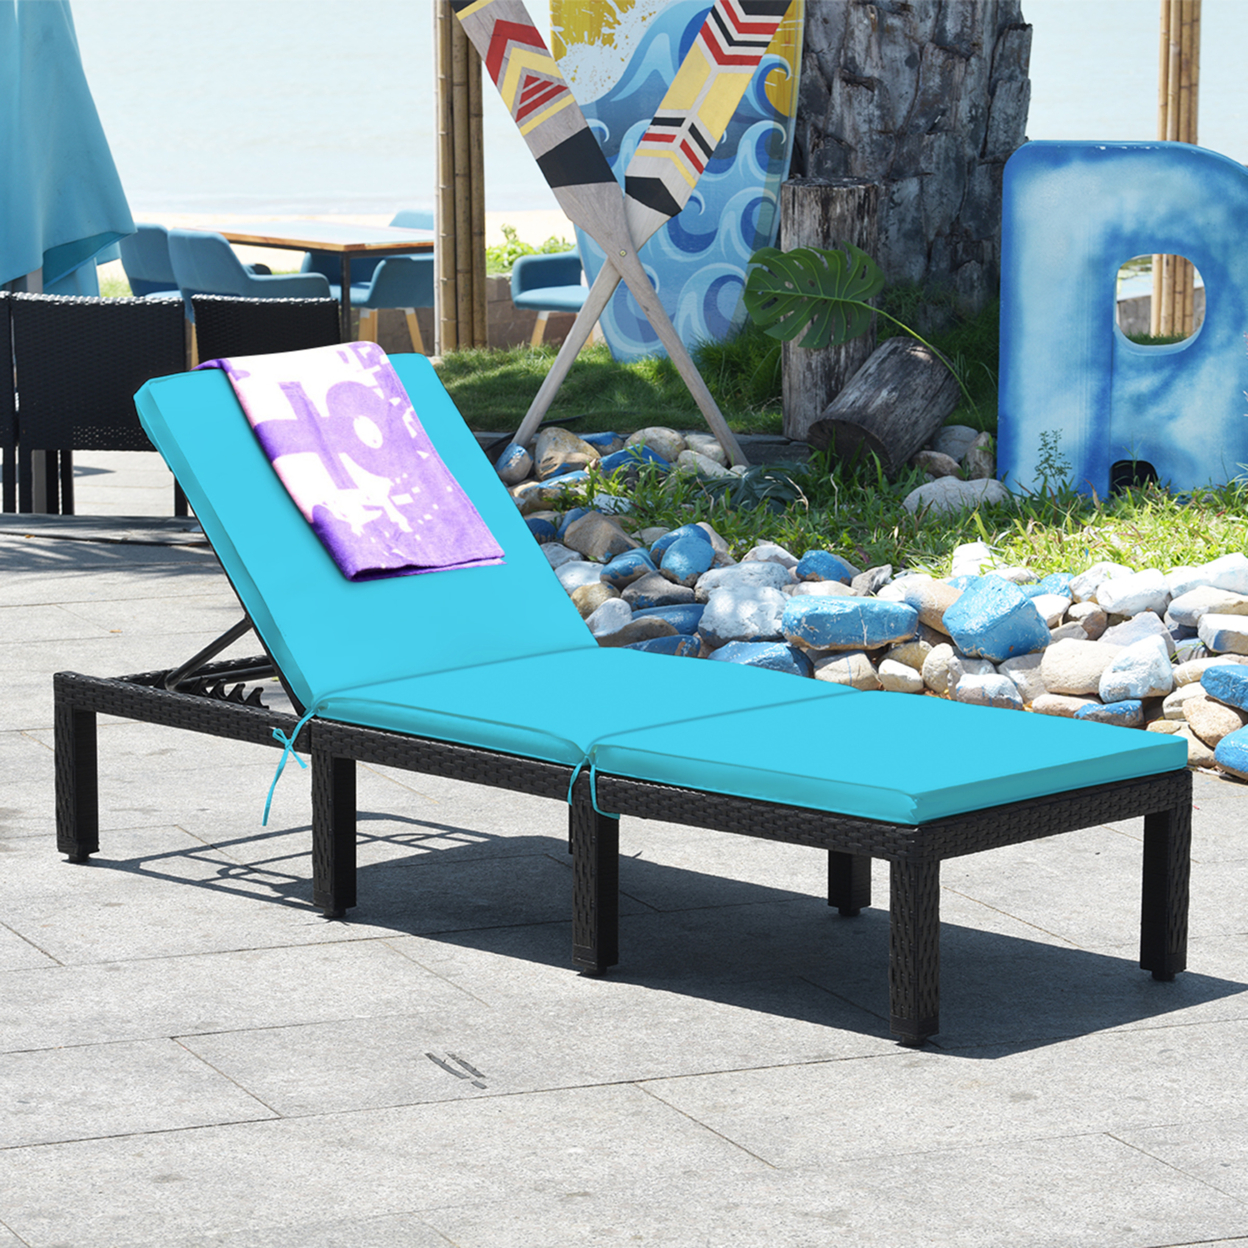 Adjustable Rattan Patio Chaise Lounge Chair Couch W/ Turquoise Cushion